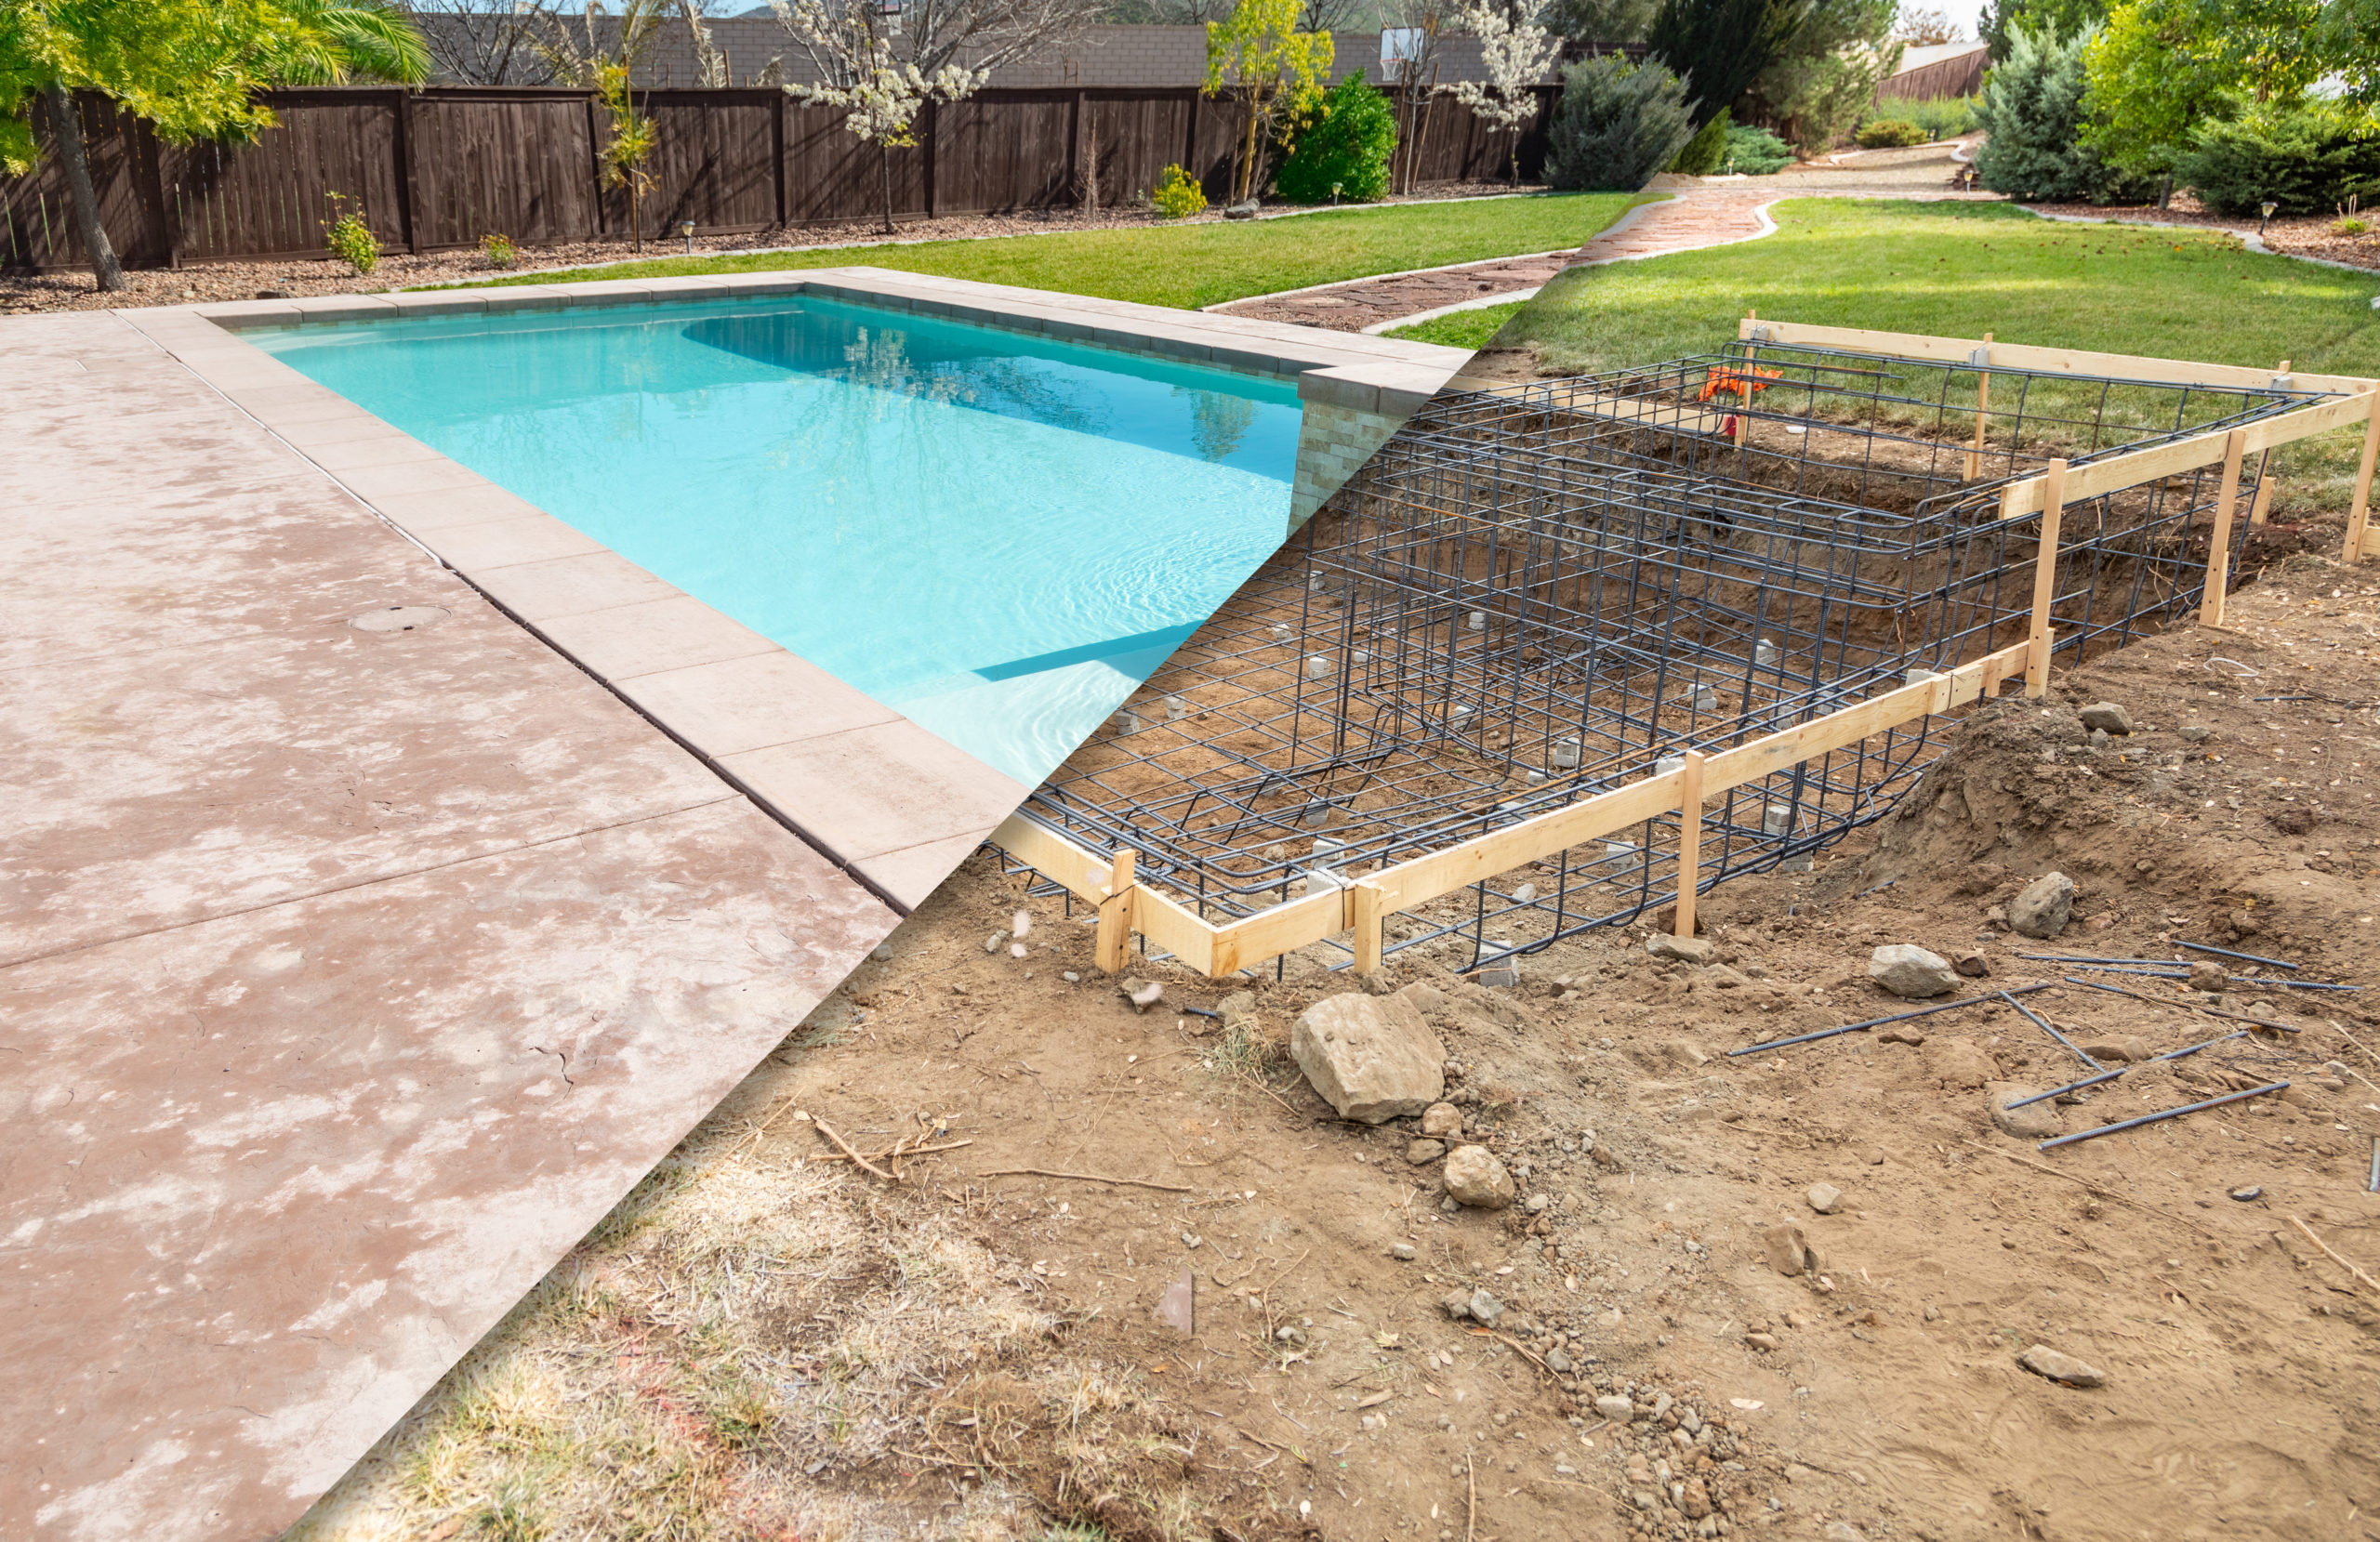 Image or diagram depicting the process of swimming pool construction, including excavation, foundation, plumbing, and finishing stages.